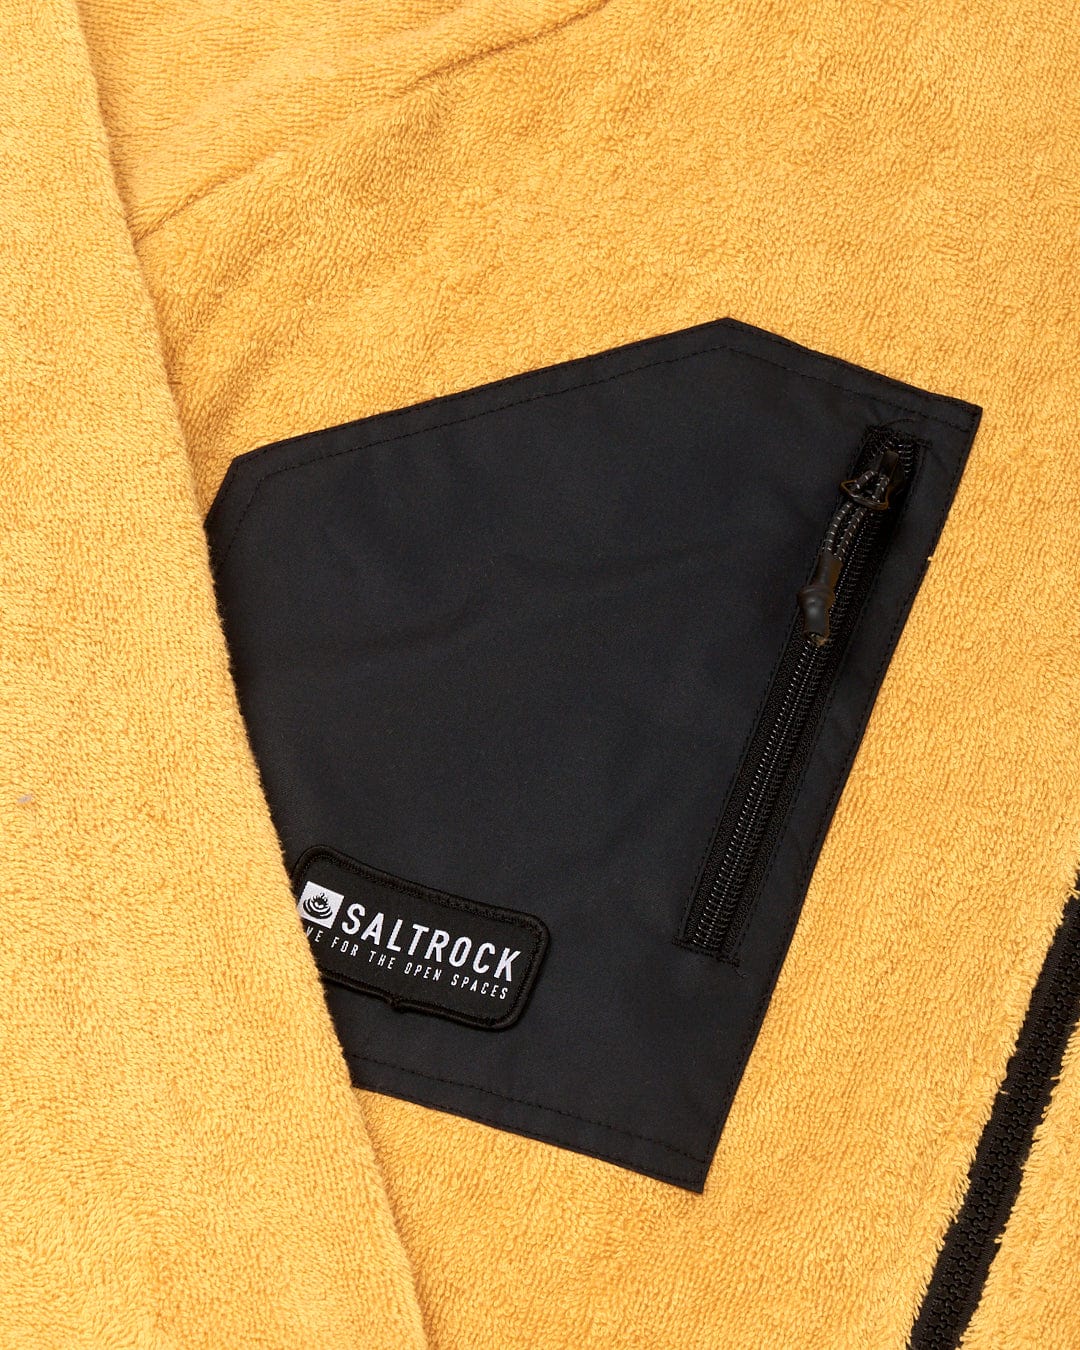 A Saltrock 3 in 1 Recycled Four Seasons Changing Robe in black and yellow, featuring a waterproof outer robe, a pocket with a zipper, lying on a yellow textured towel.